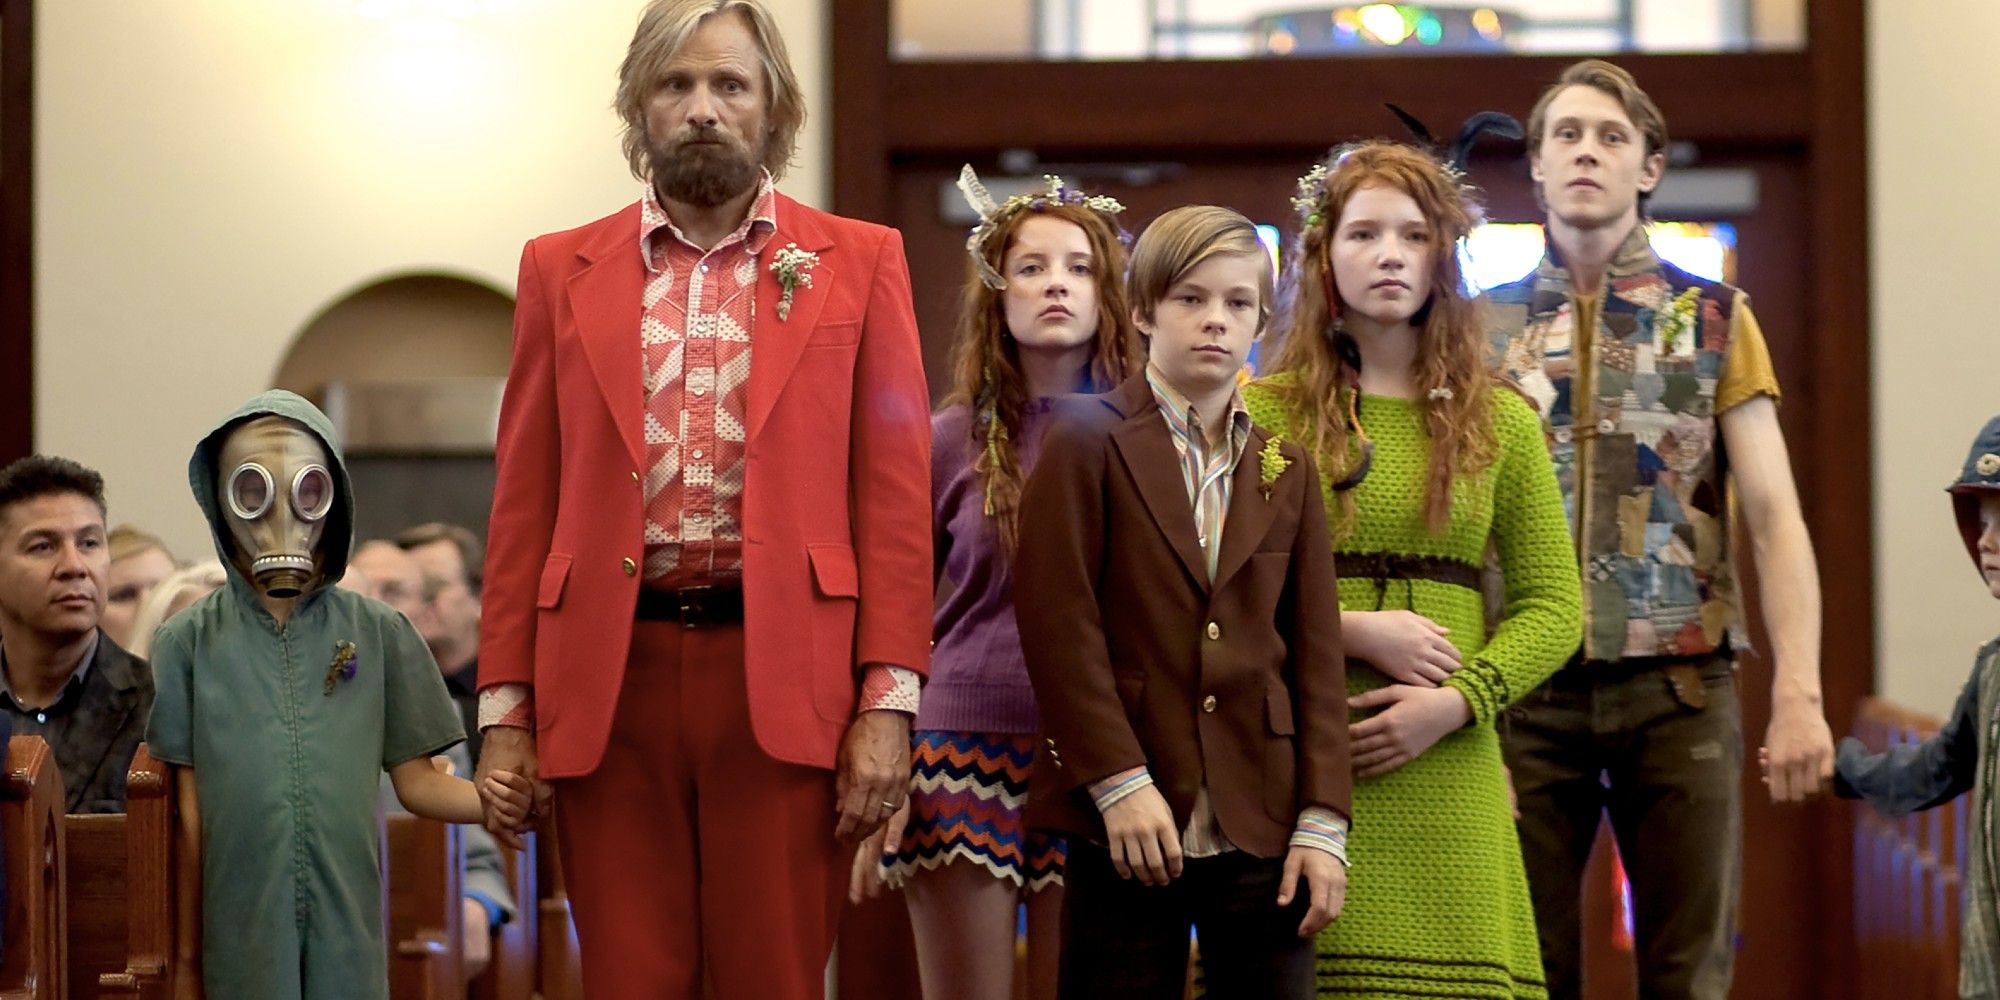 The family standing together in a church in Captain Fantastic